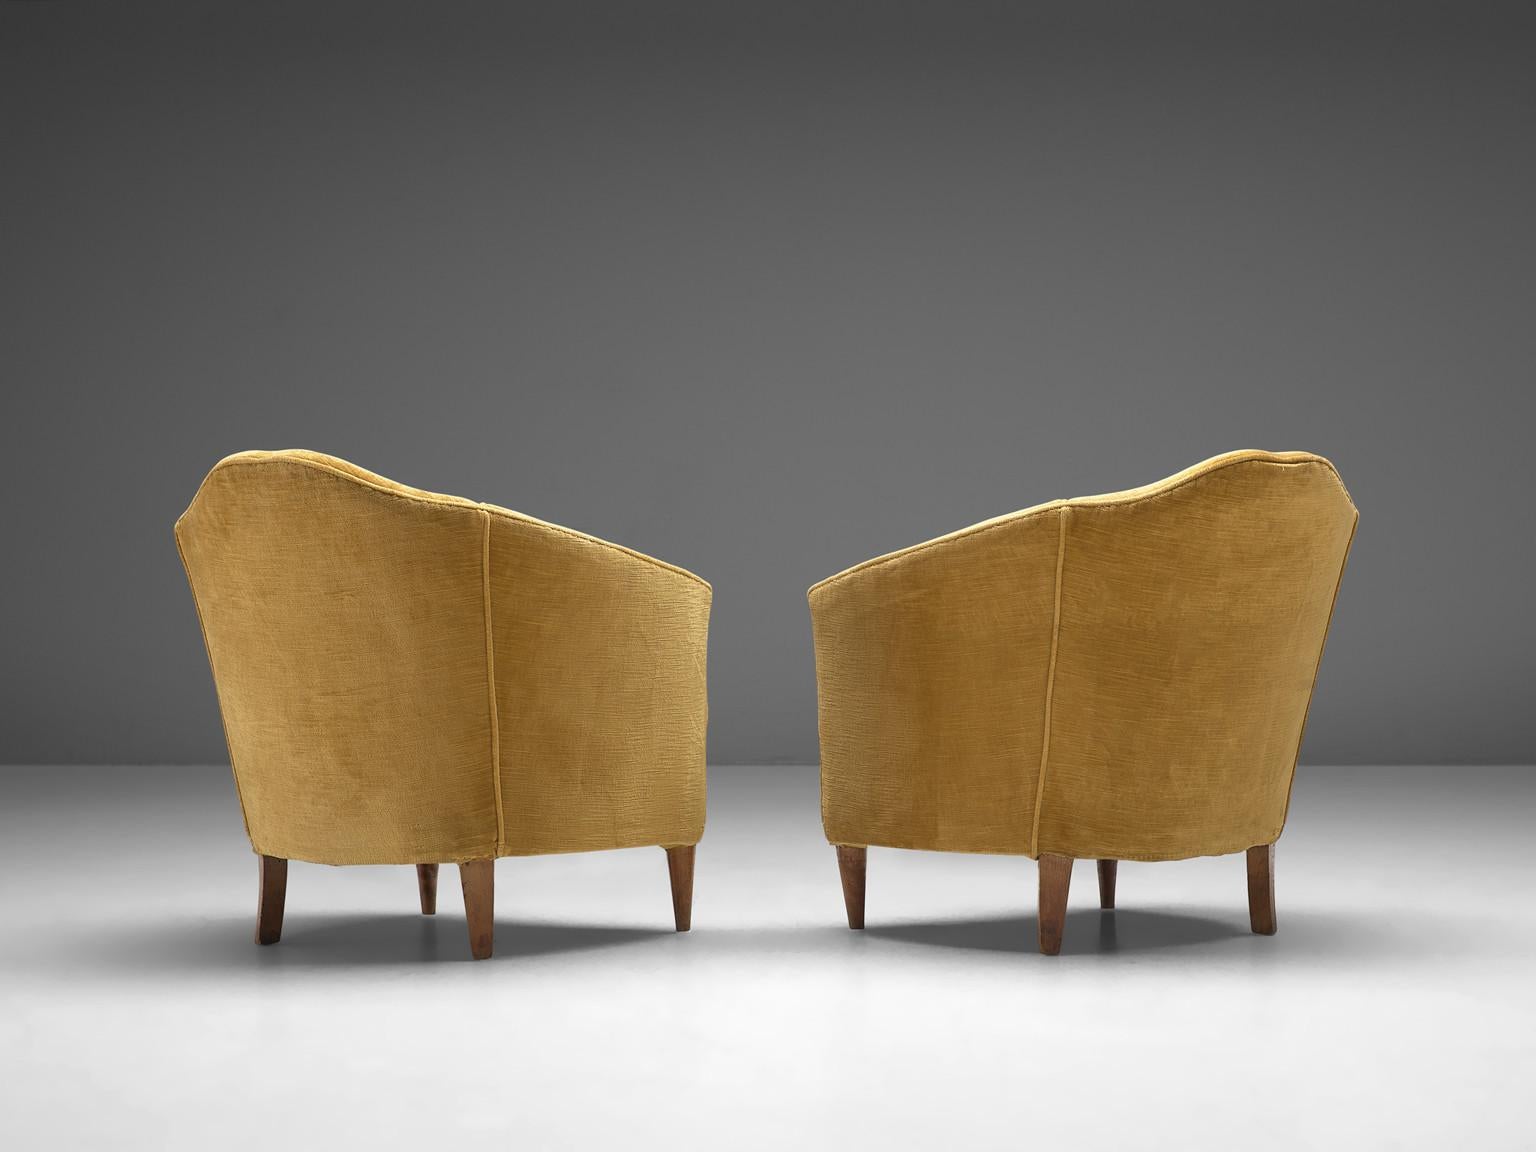 Pair of lounge chairs in velvet and wood, Italy, 1960s.

Elegant pair of armchairs in yellow golden velvet. The chairs have organic shaped seating and back. The back of the chairs is waved and give the look a soft look. The chairs are supported by